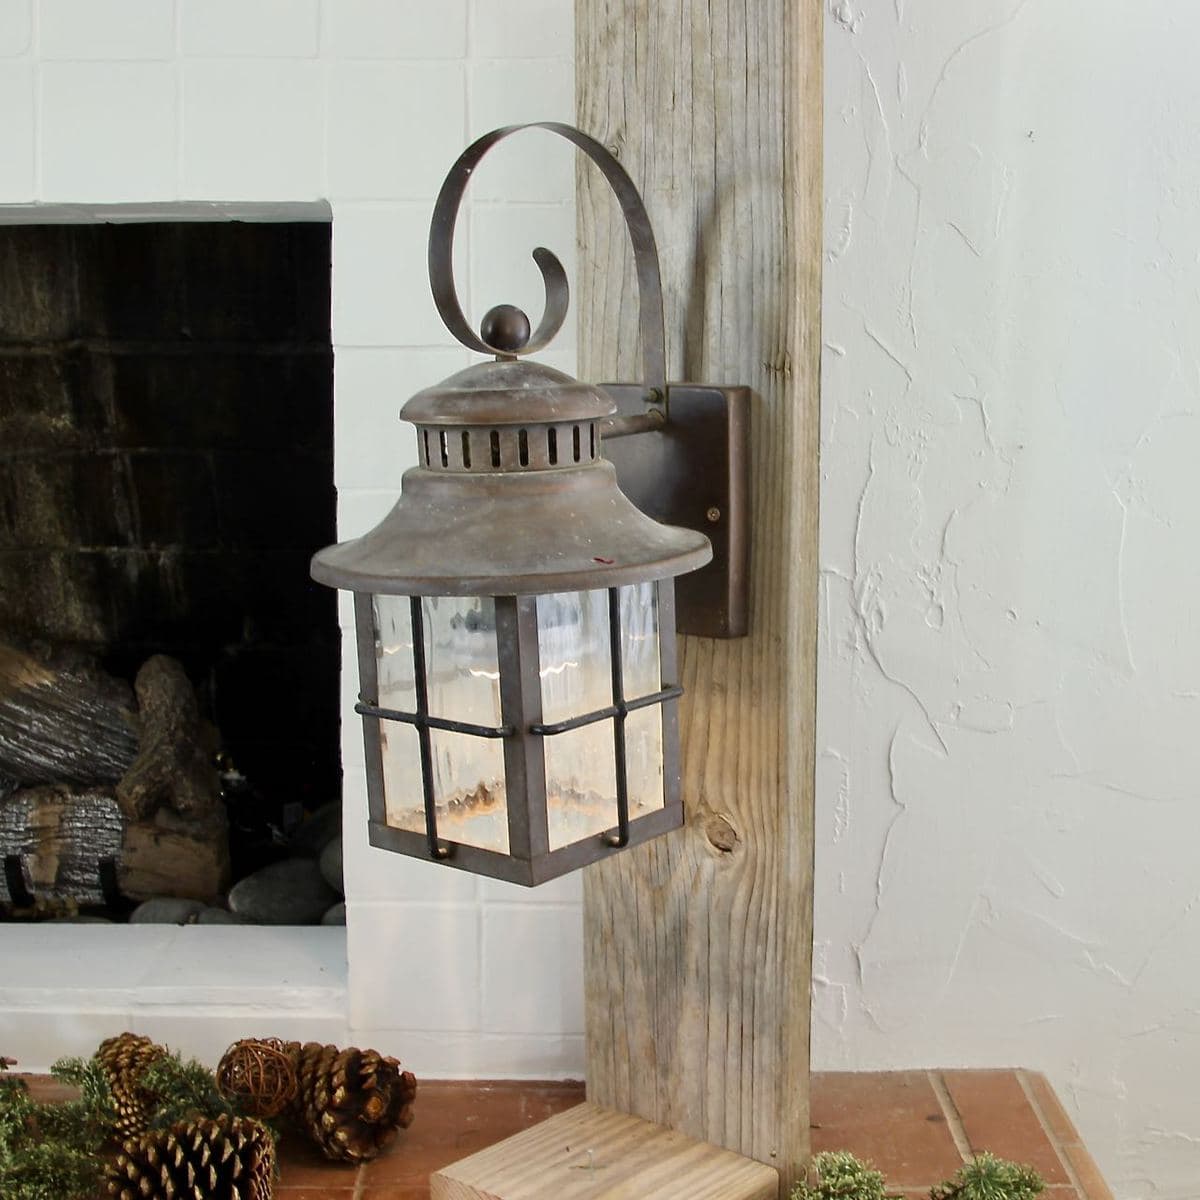 planks standing upright with a vintage lantern attached